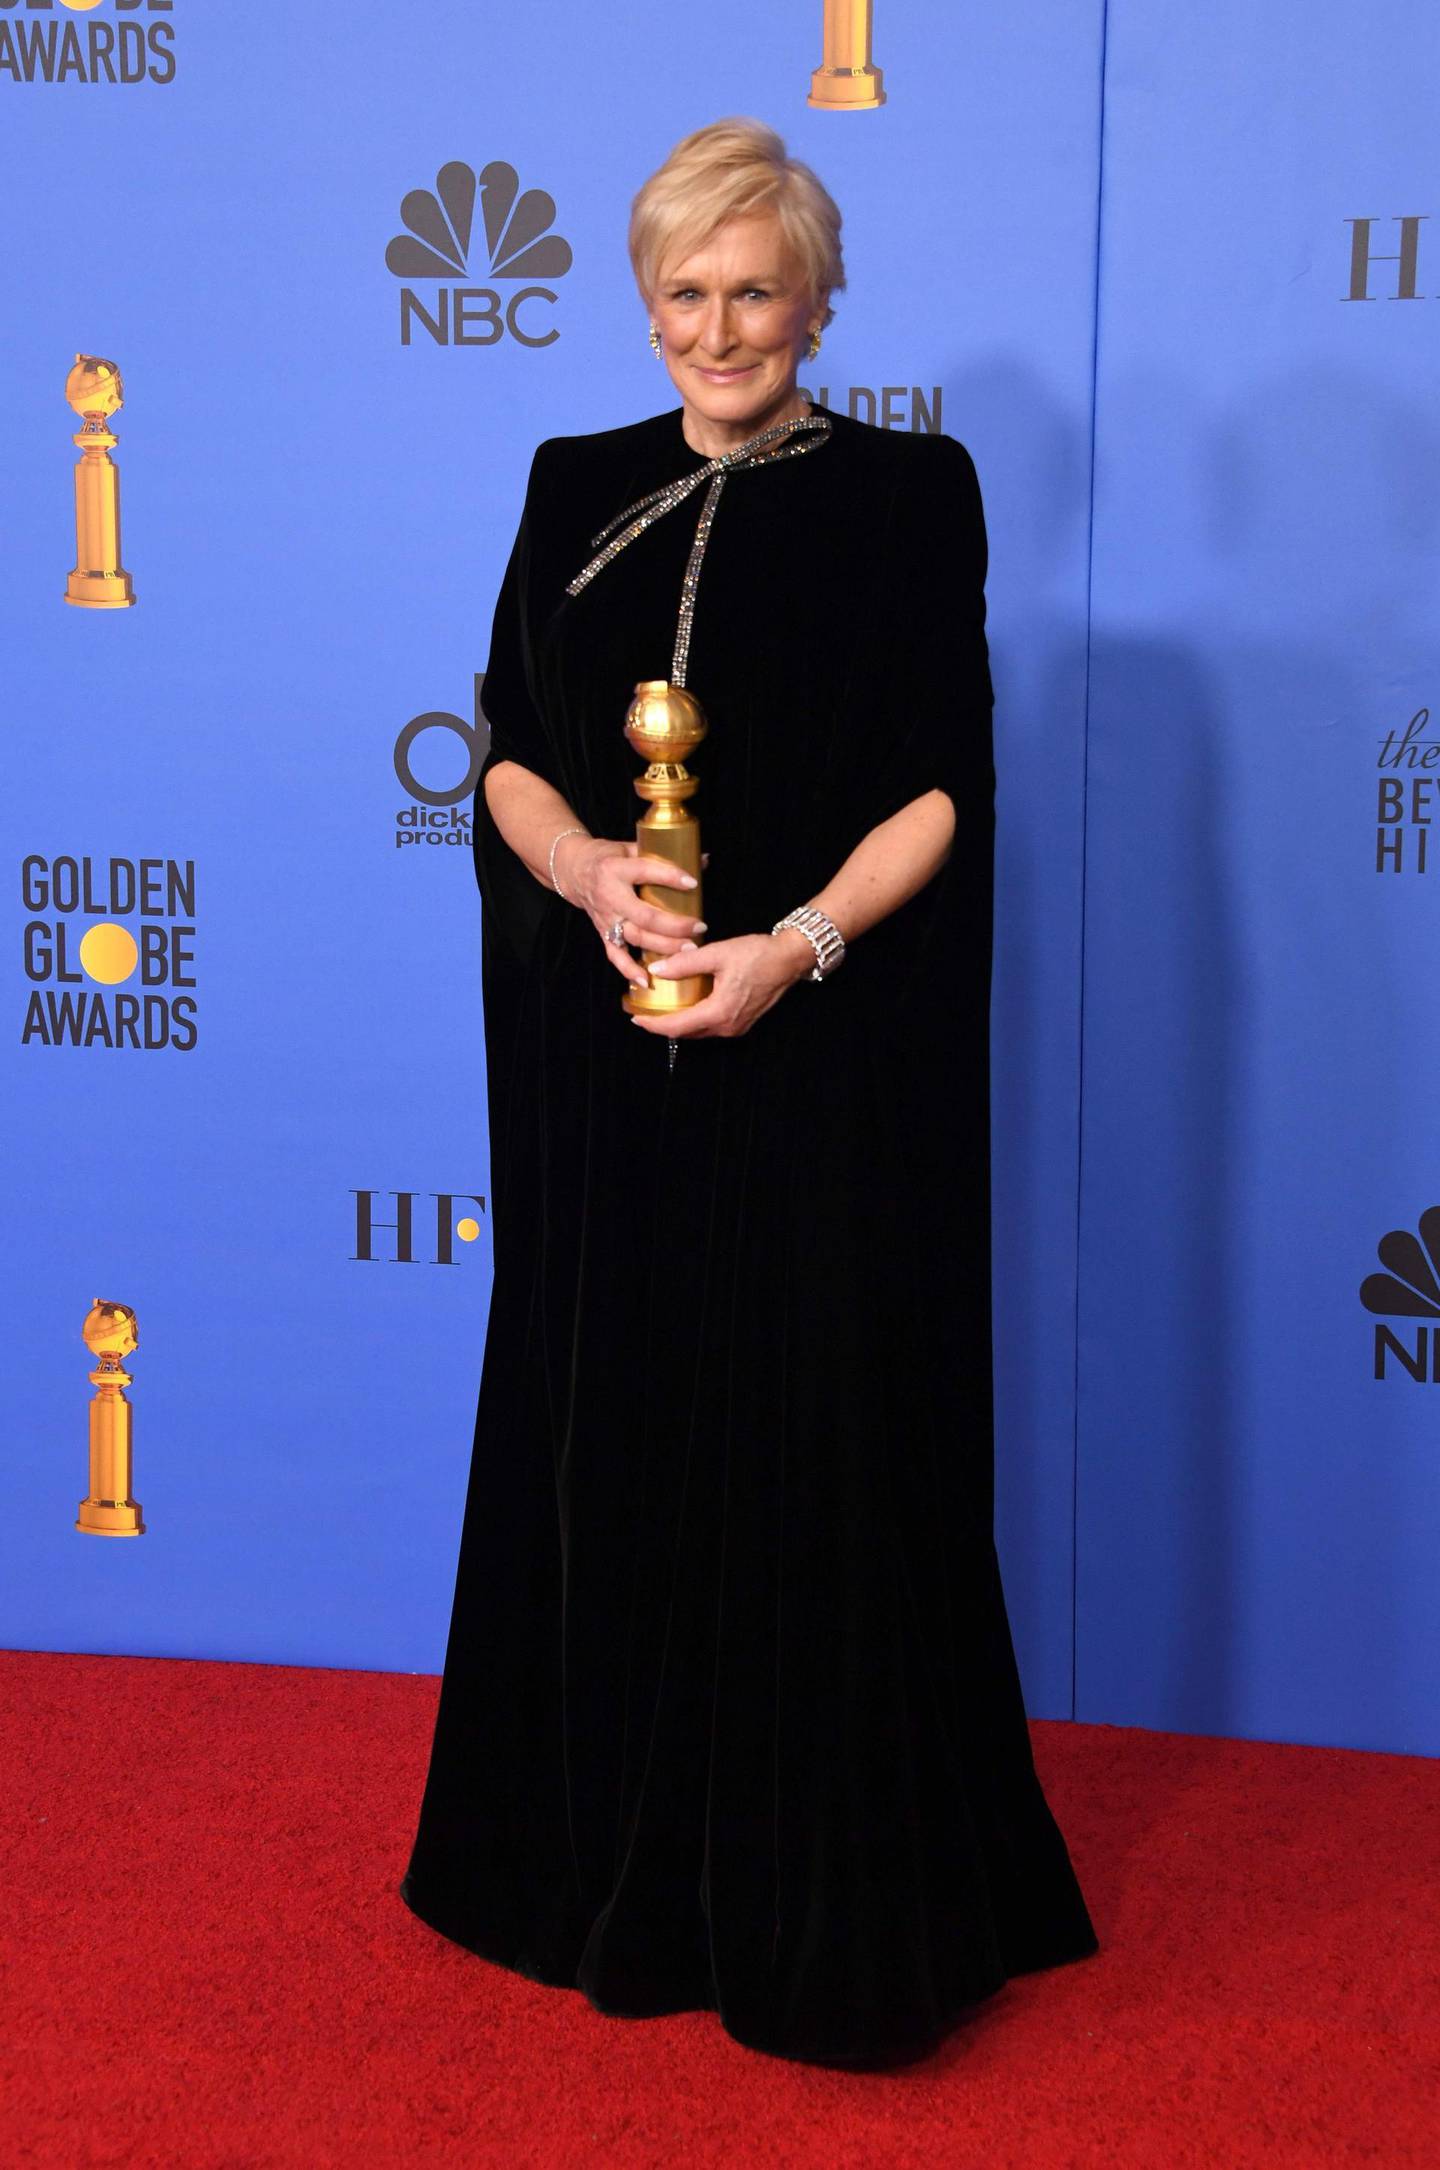 Best Actress in a Motion Picture – Drama for "The Wife" winner Glenn Close poses with the trophy during the 76th annual Golden Globe Awards on January 6, 2019, at the Beverly Hilton hotel in Beverly Hills, California. / AFP / Mark RALSTON
